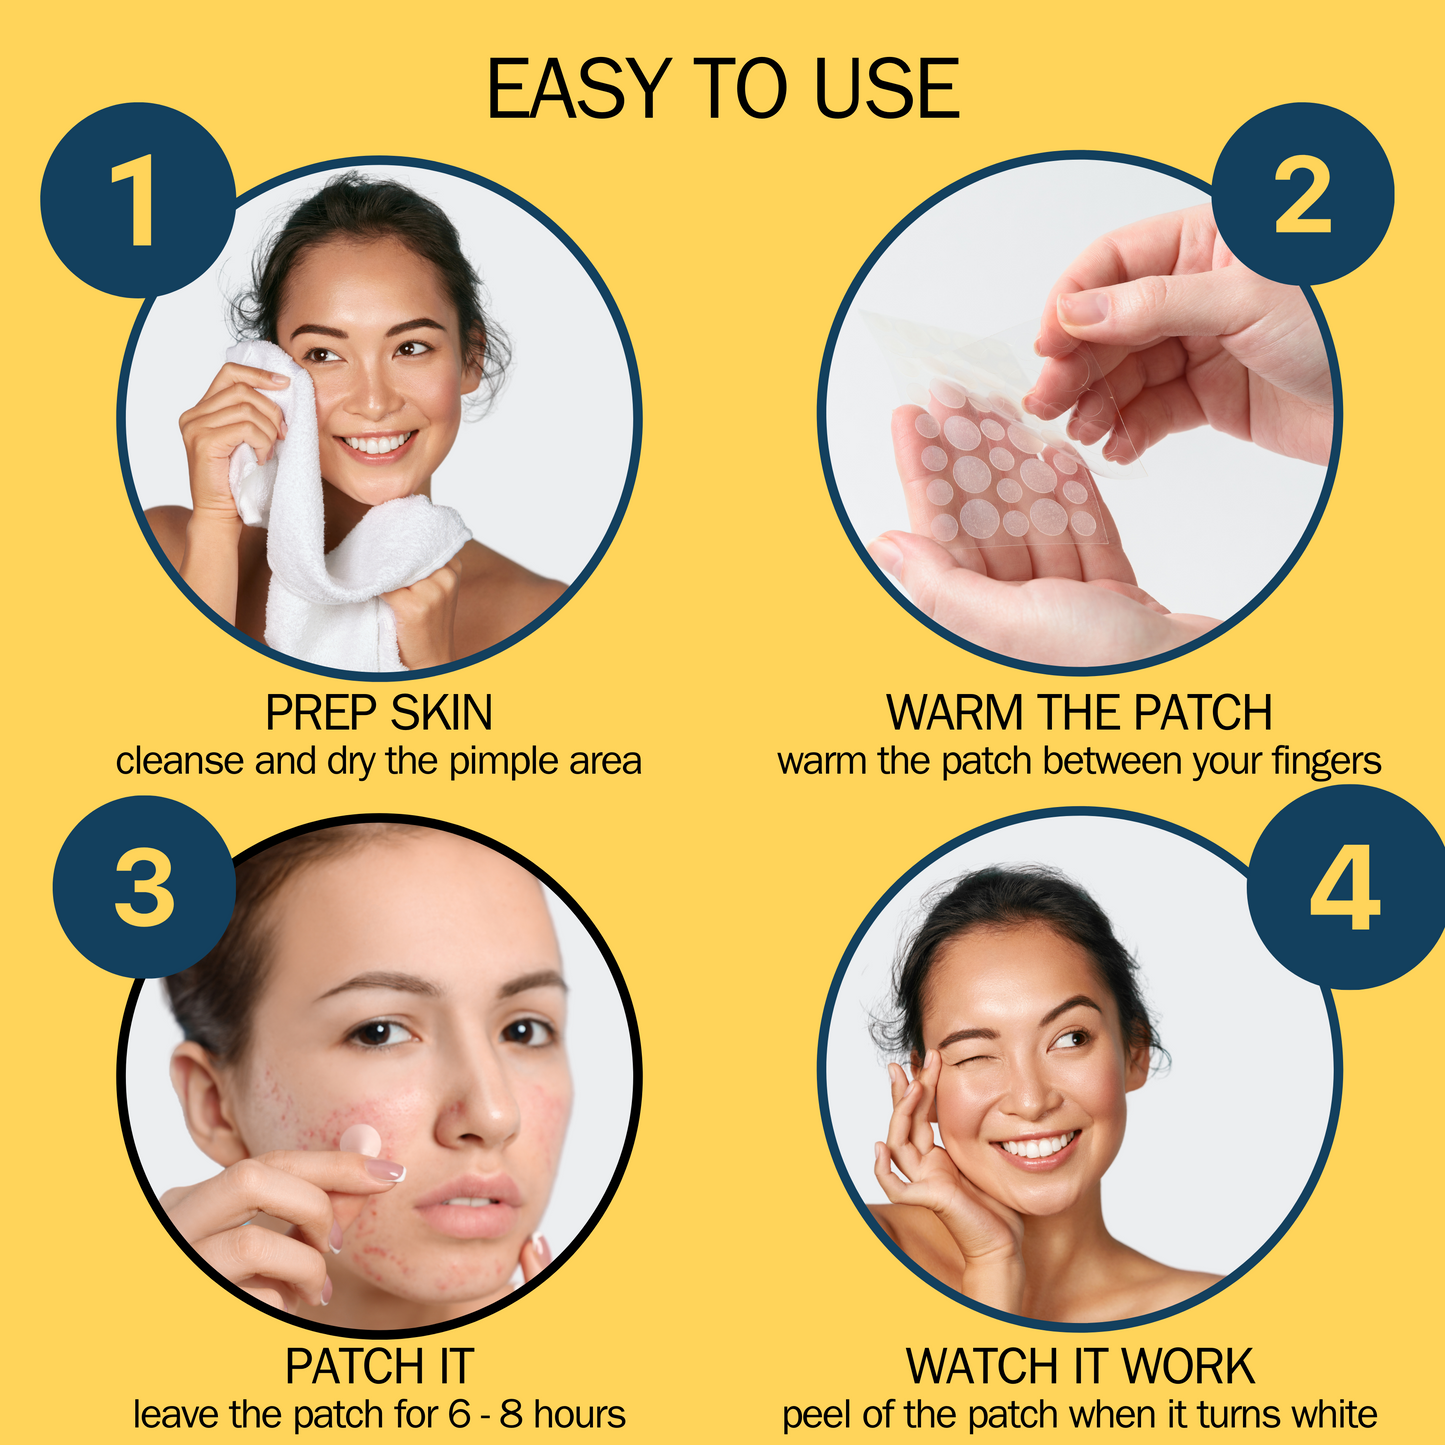 Easy to use: Step 1 - Prep skin by cleaning and drying pimple area. Step 2: Warm patch between fingers. Step 3: Apply patch and leave on for 6-8 hours. Step 4: Peal patch and watch it work!